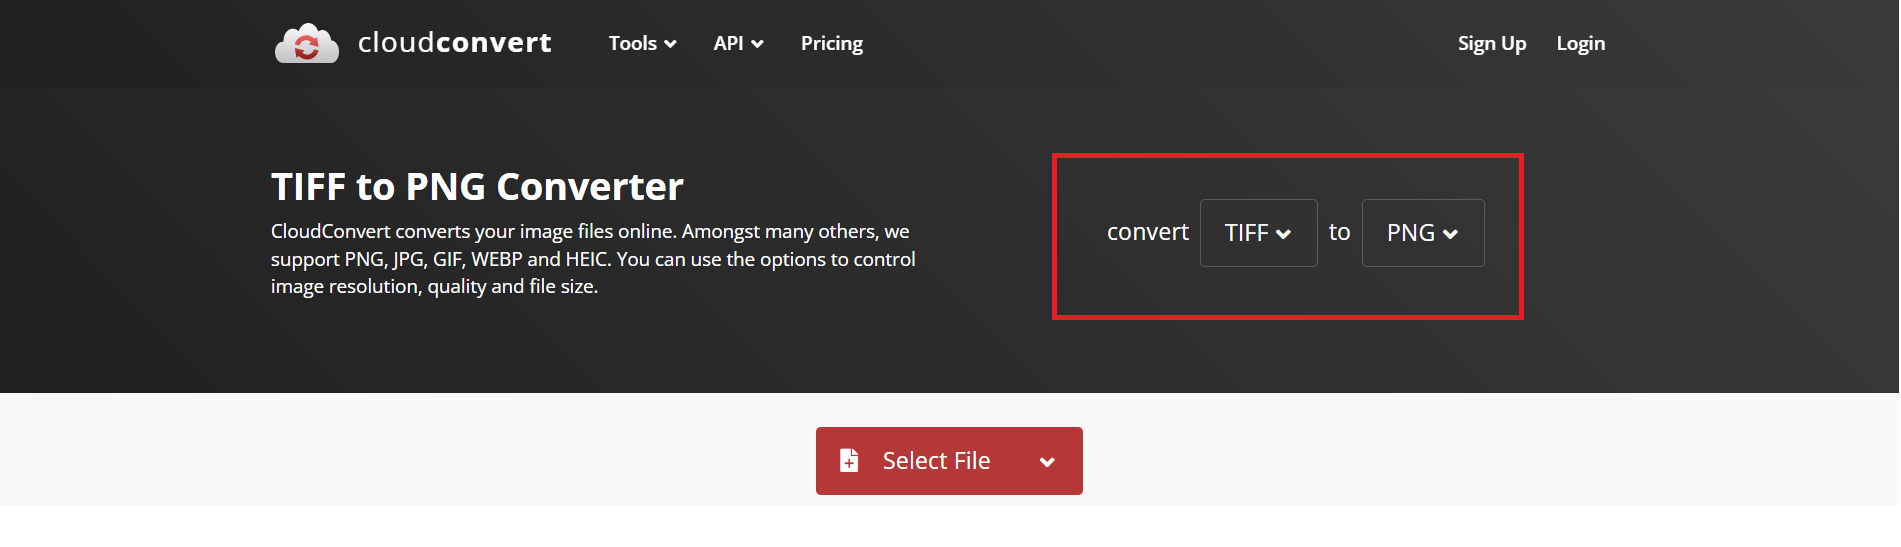 How to View Old Image Files Online Using CloudConvert: Step 2